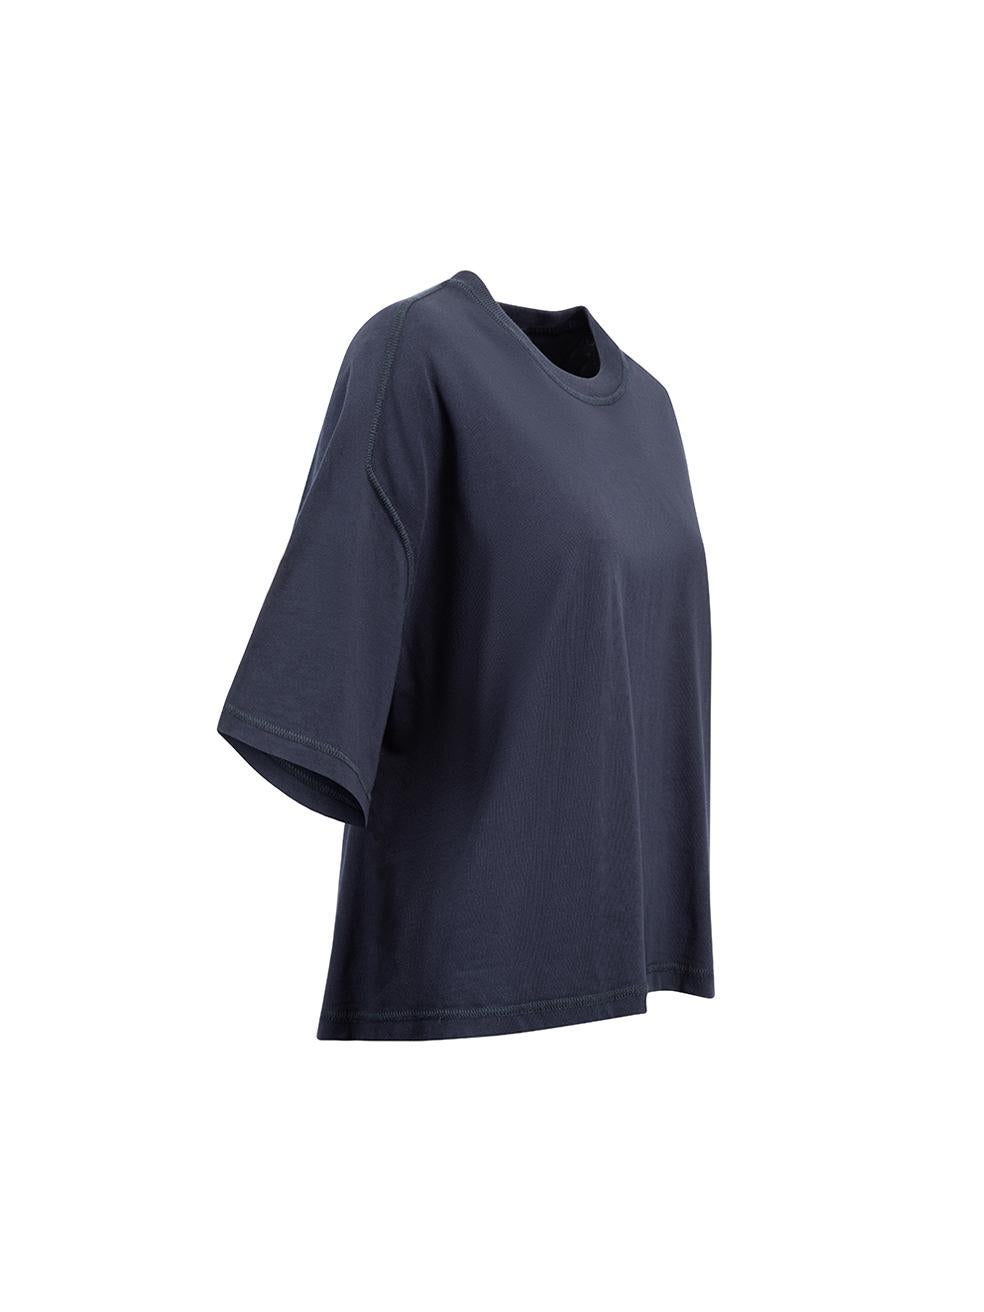 CONDITION is Never Worn. No visible wear to top is evident on this used Bottega Veneta designer resale item.



Details


Navy

Cotton

T-short

Round neck

Oversized fit





Made in Italy 



Composition

100% Cotton



Care instructions:  Hand